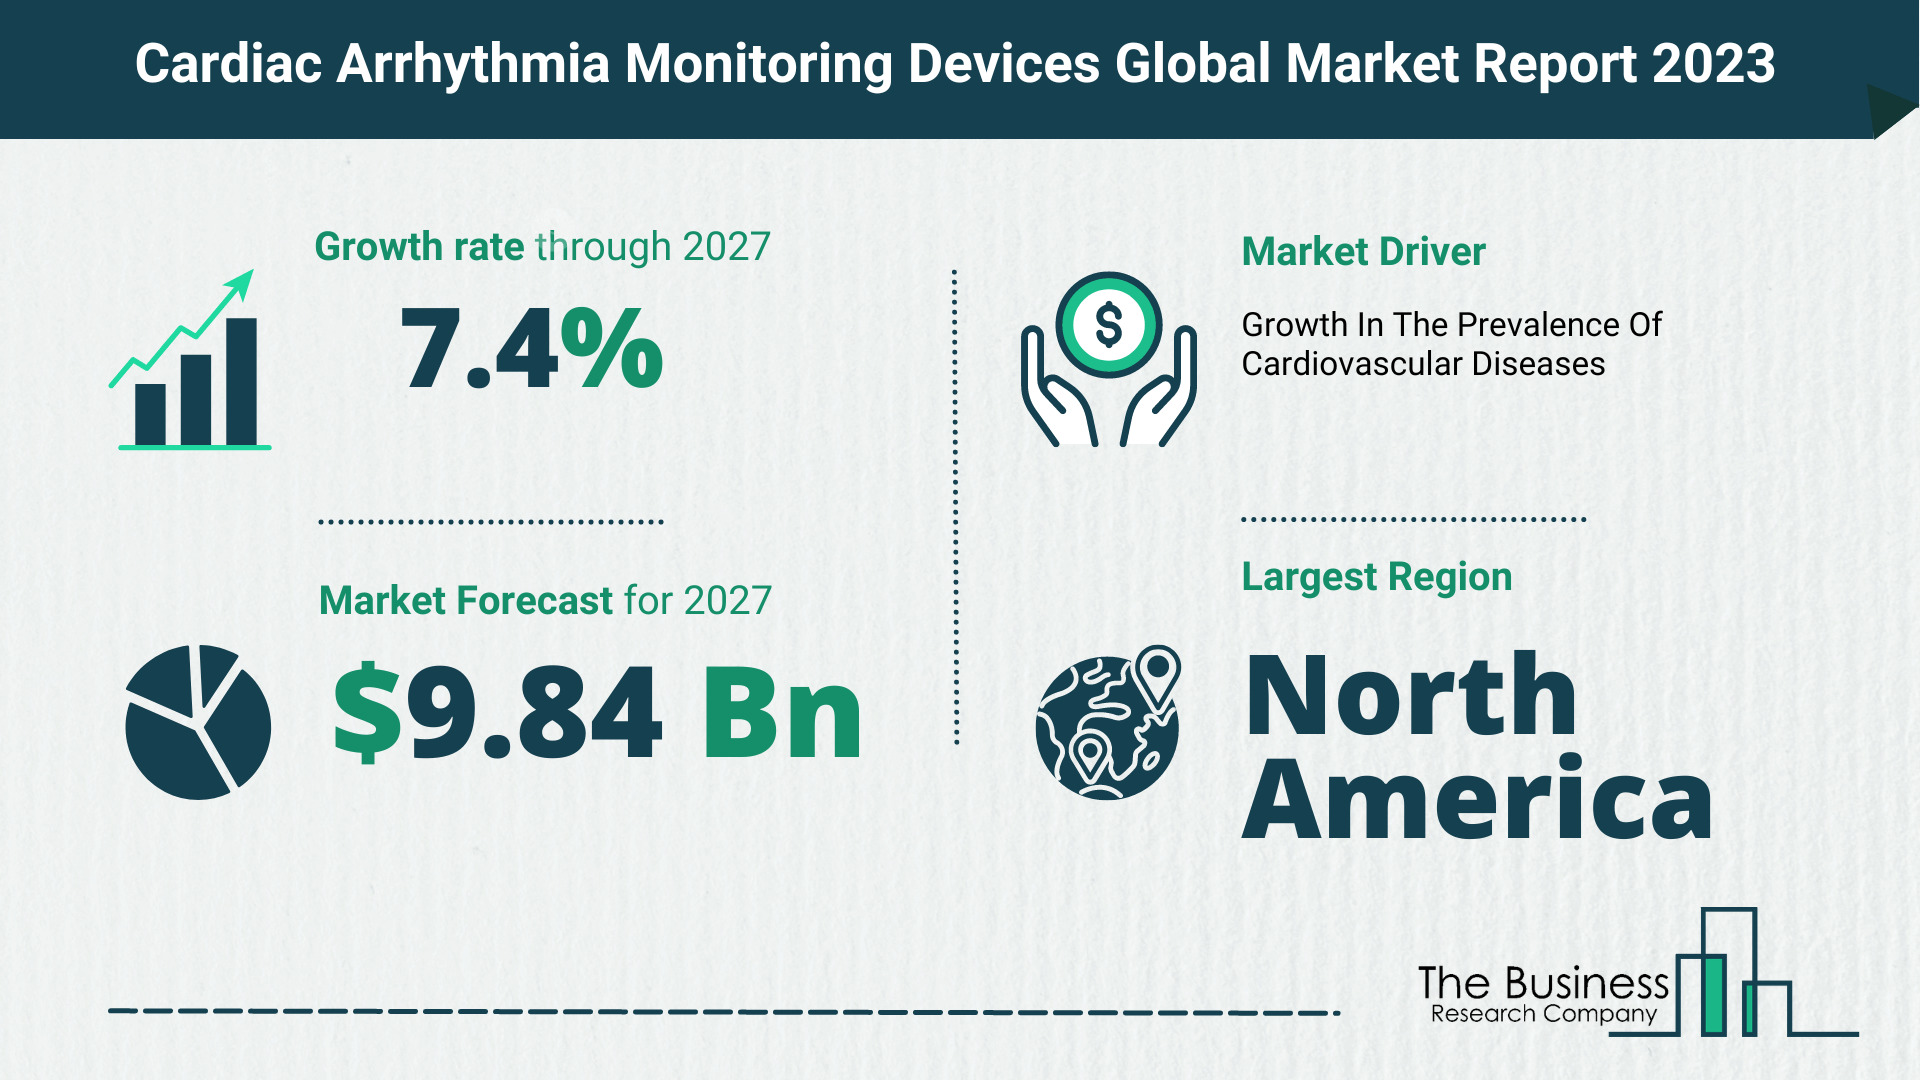 How Will The Cardiac Arrhythmia Monitoring Devices Market Globally Expand In 2023?